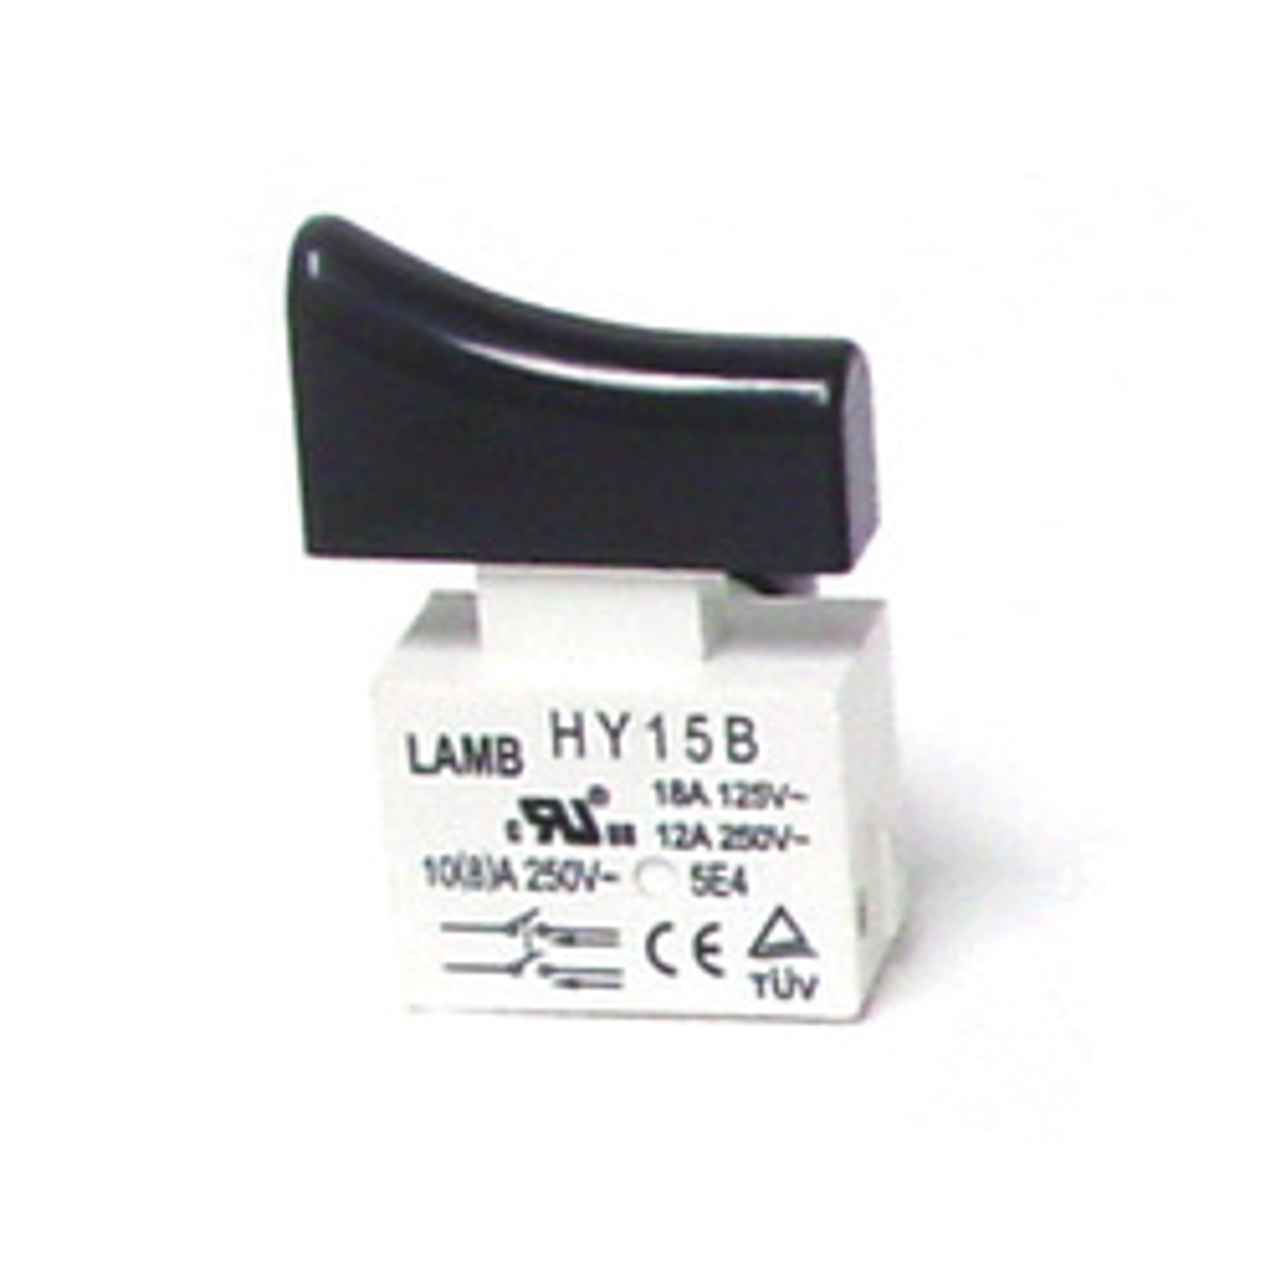 E-Switch HY106-6Y7-000-0000 Tool and Trigger Switches